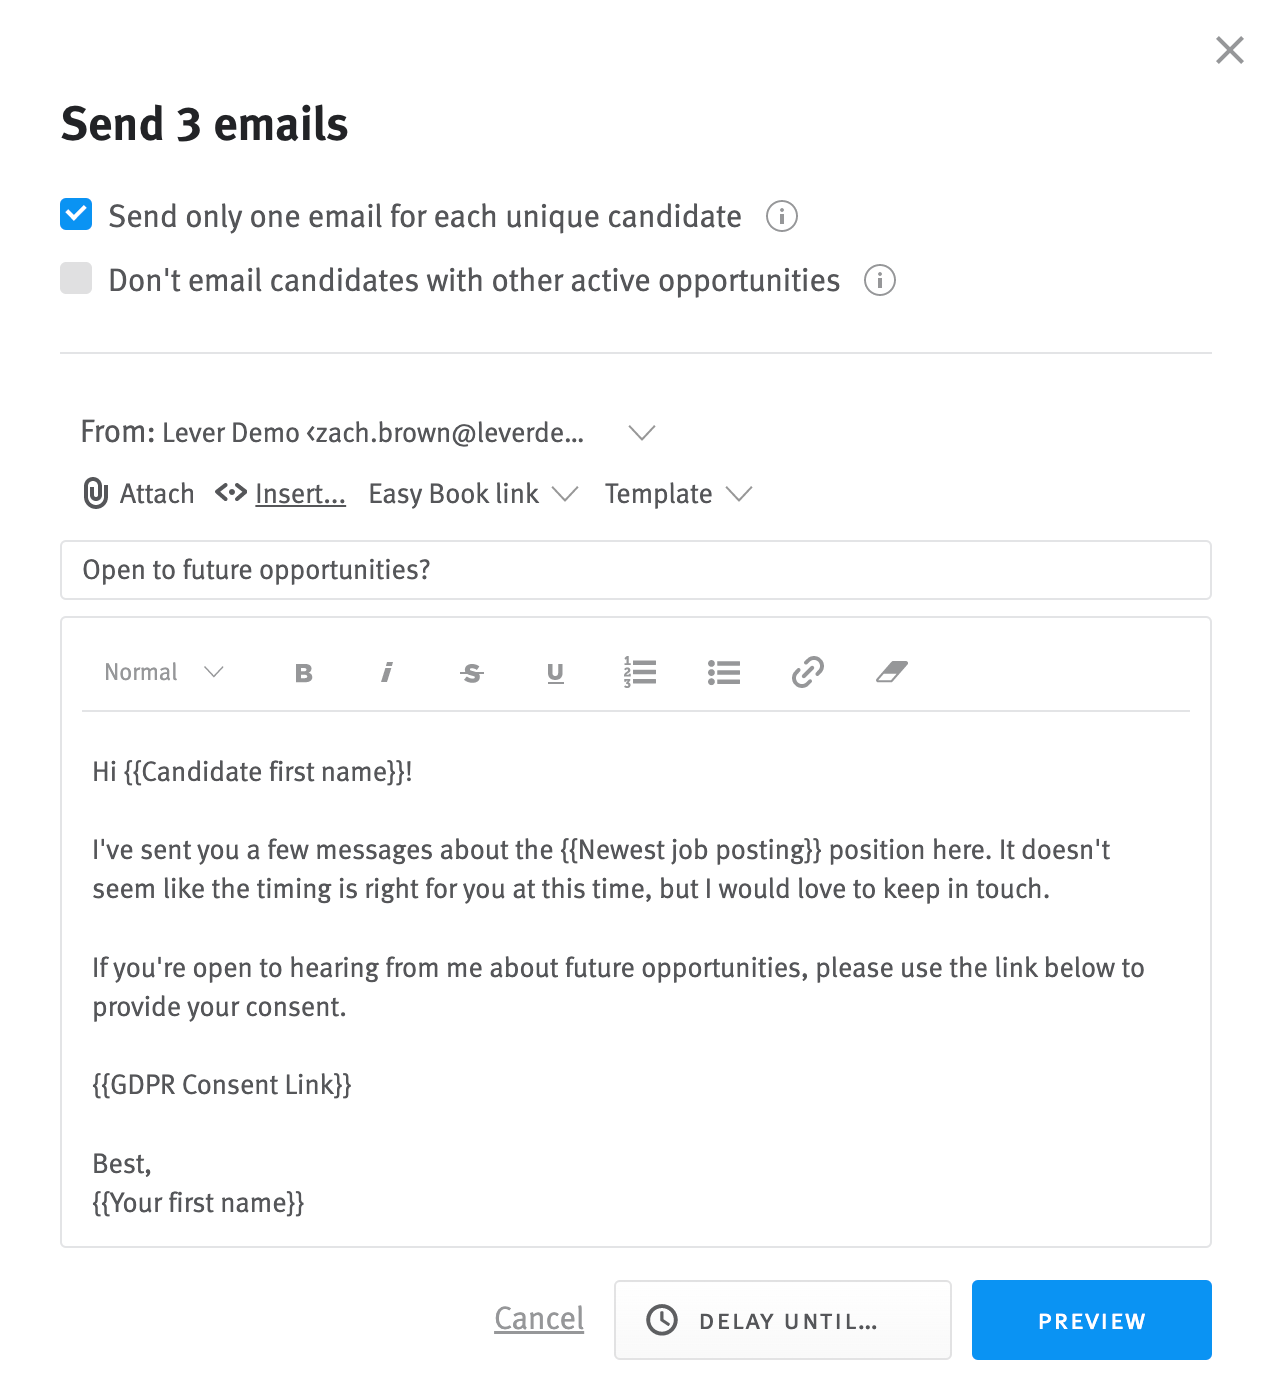 Bulk send email modal with option to only send one email per unique candidate selected.